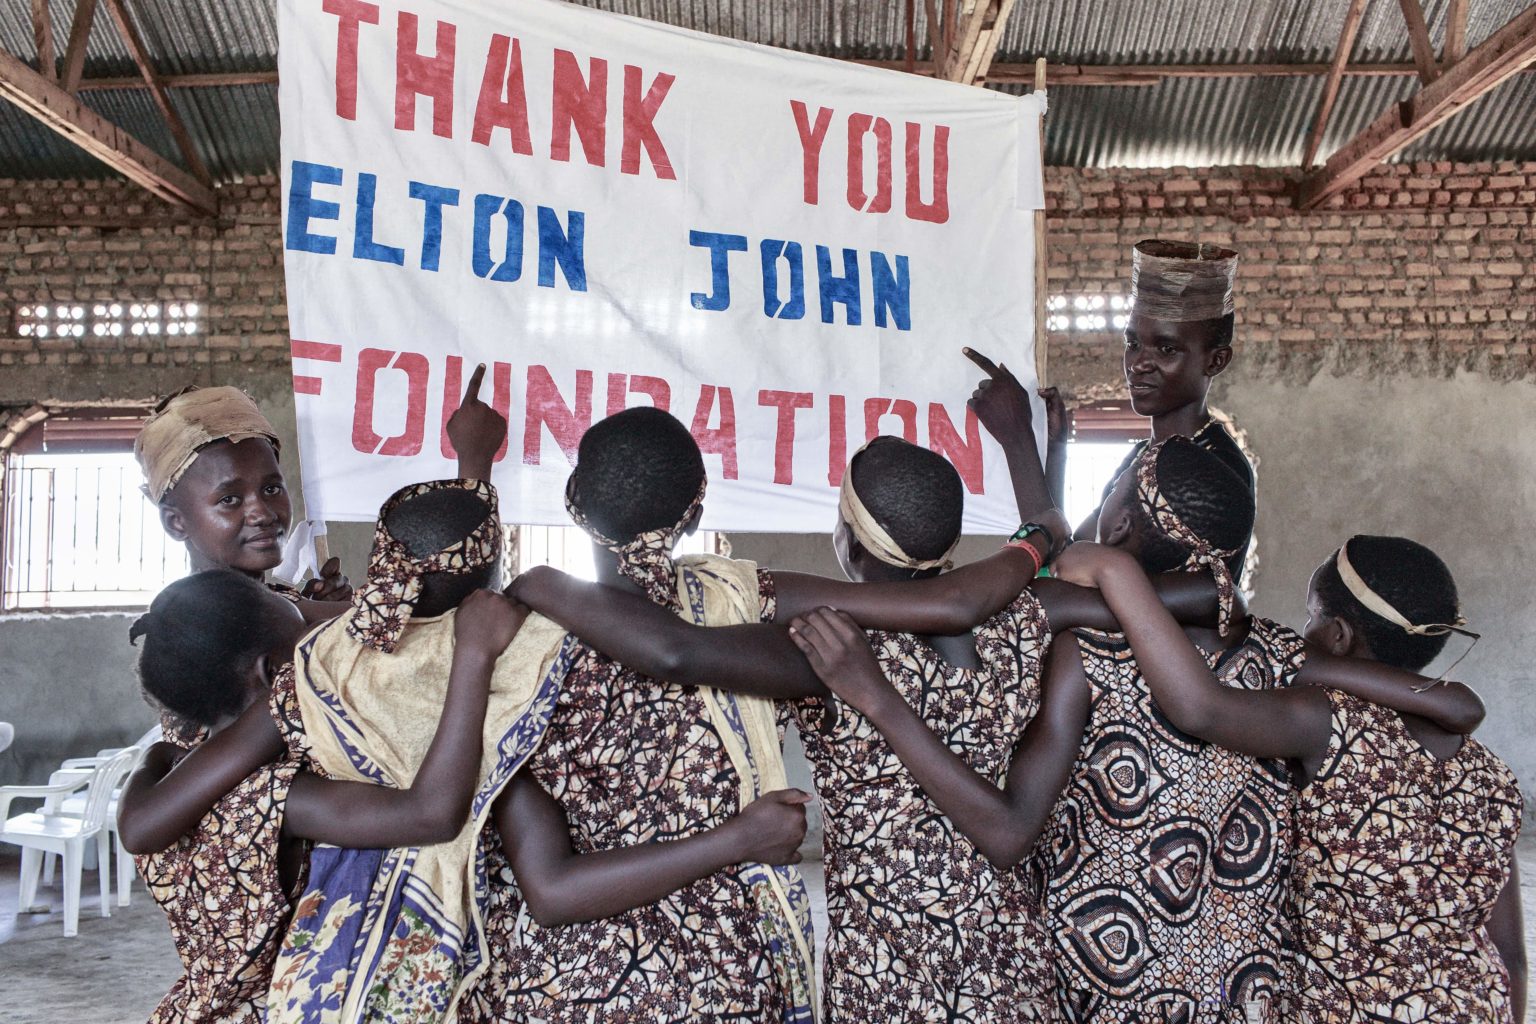 Young people in Kenya who are living with HIV hold up a sign that says 'Thank you Elton John Foundation'.